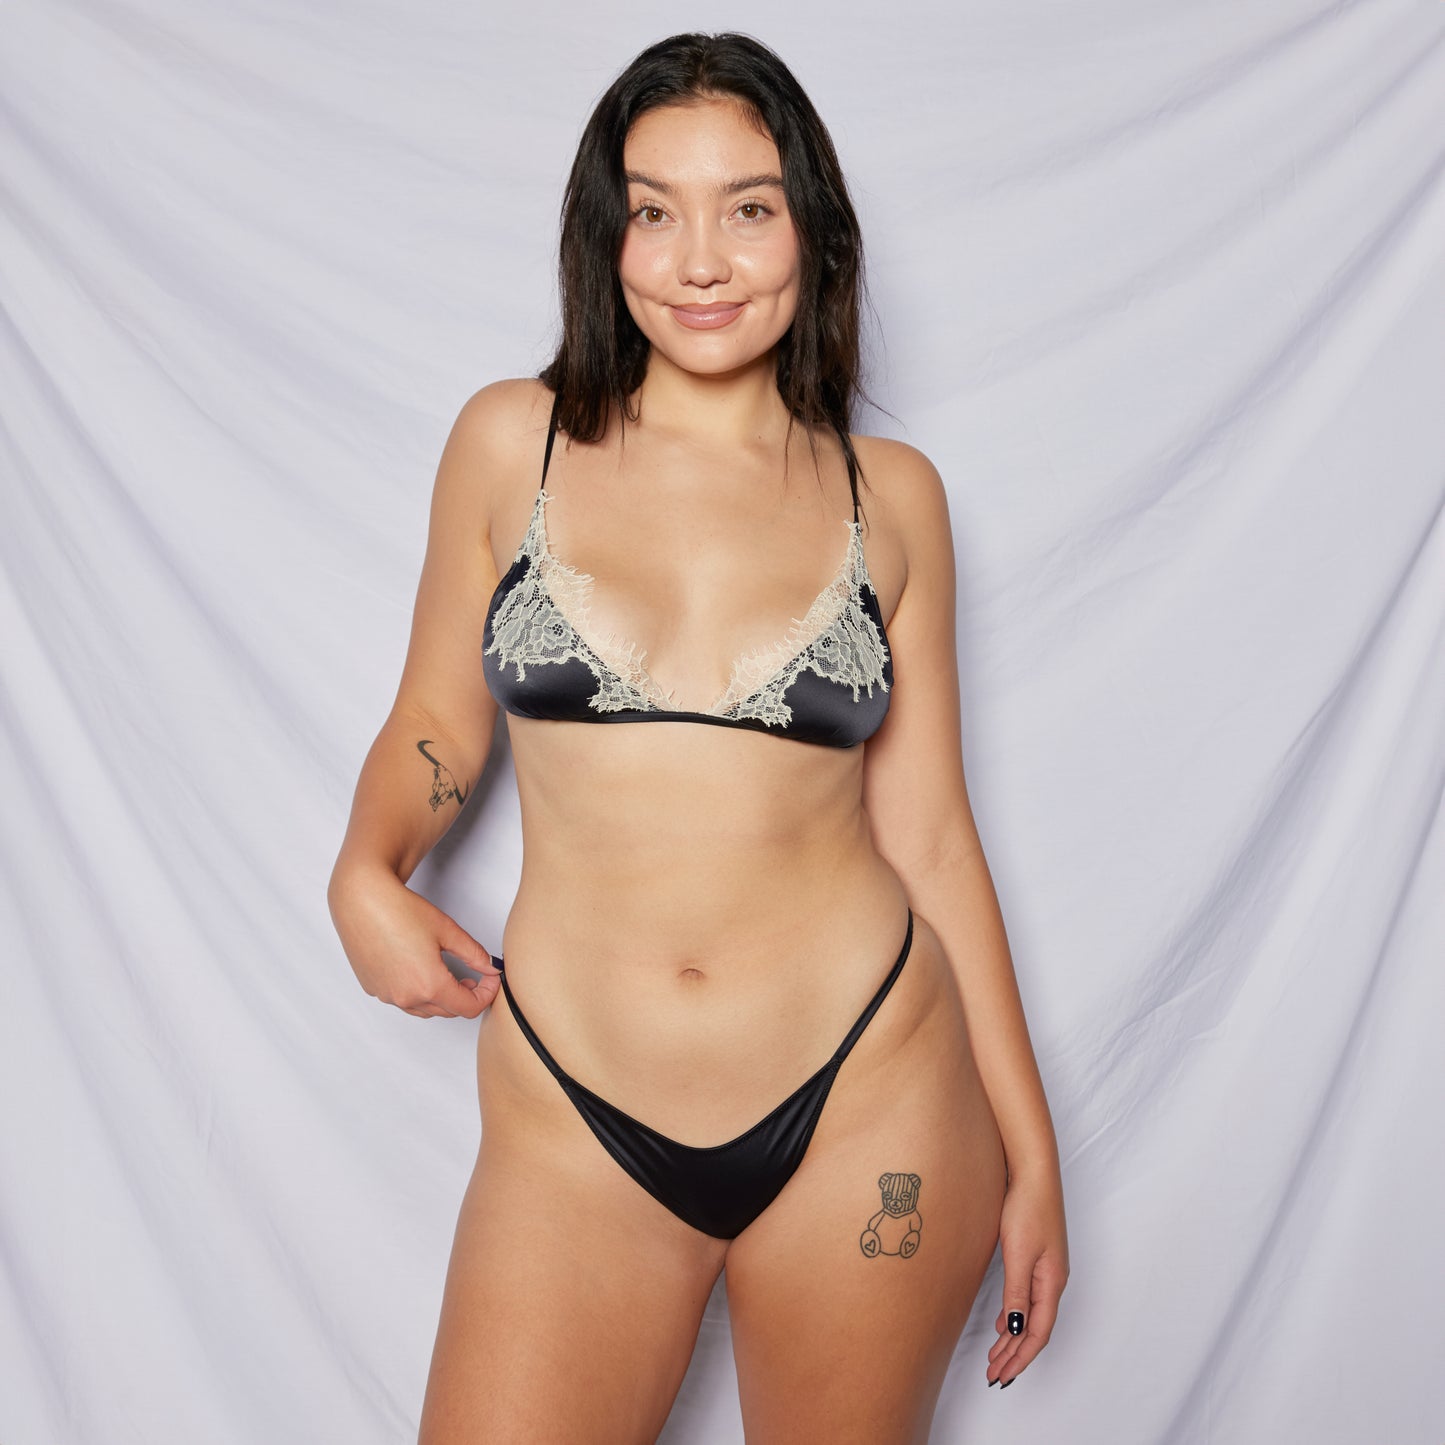 The Fiesta Bralette - Black with White Lace